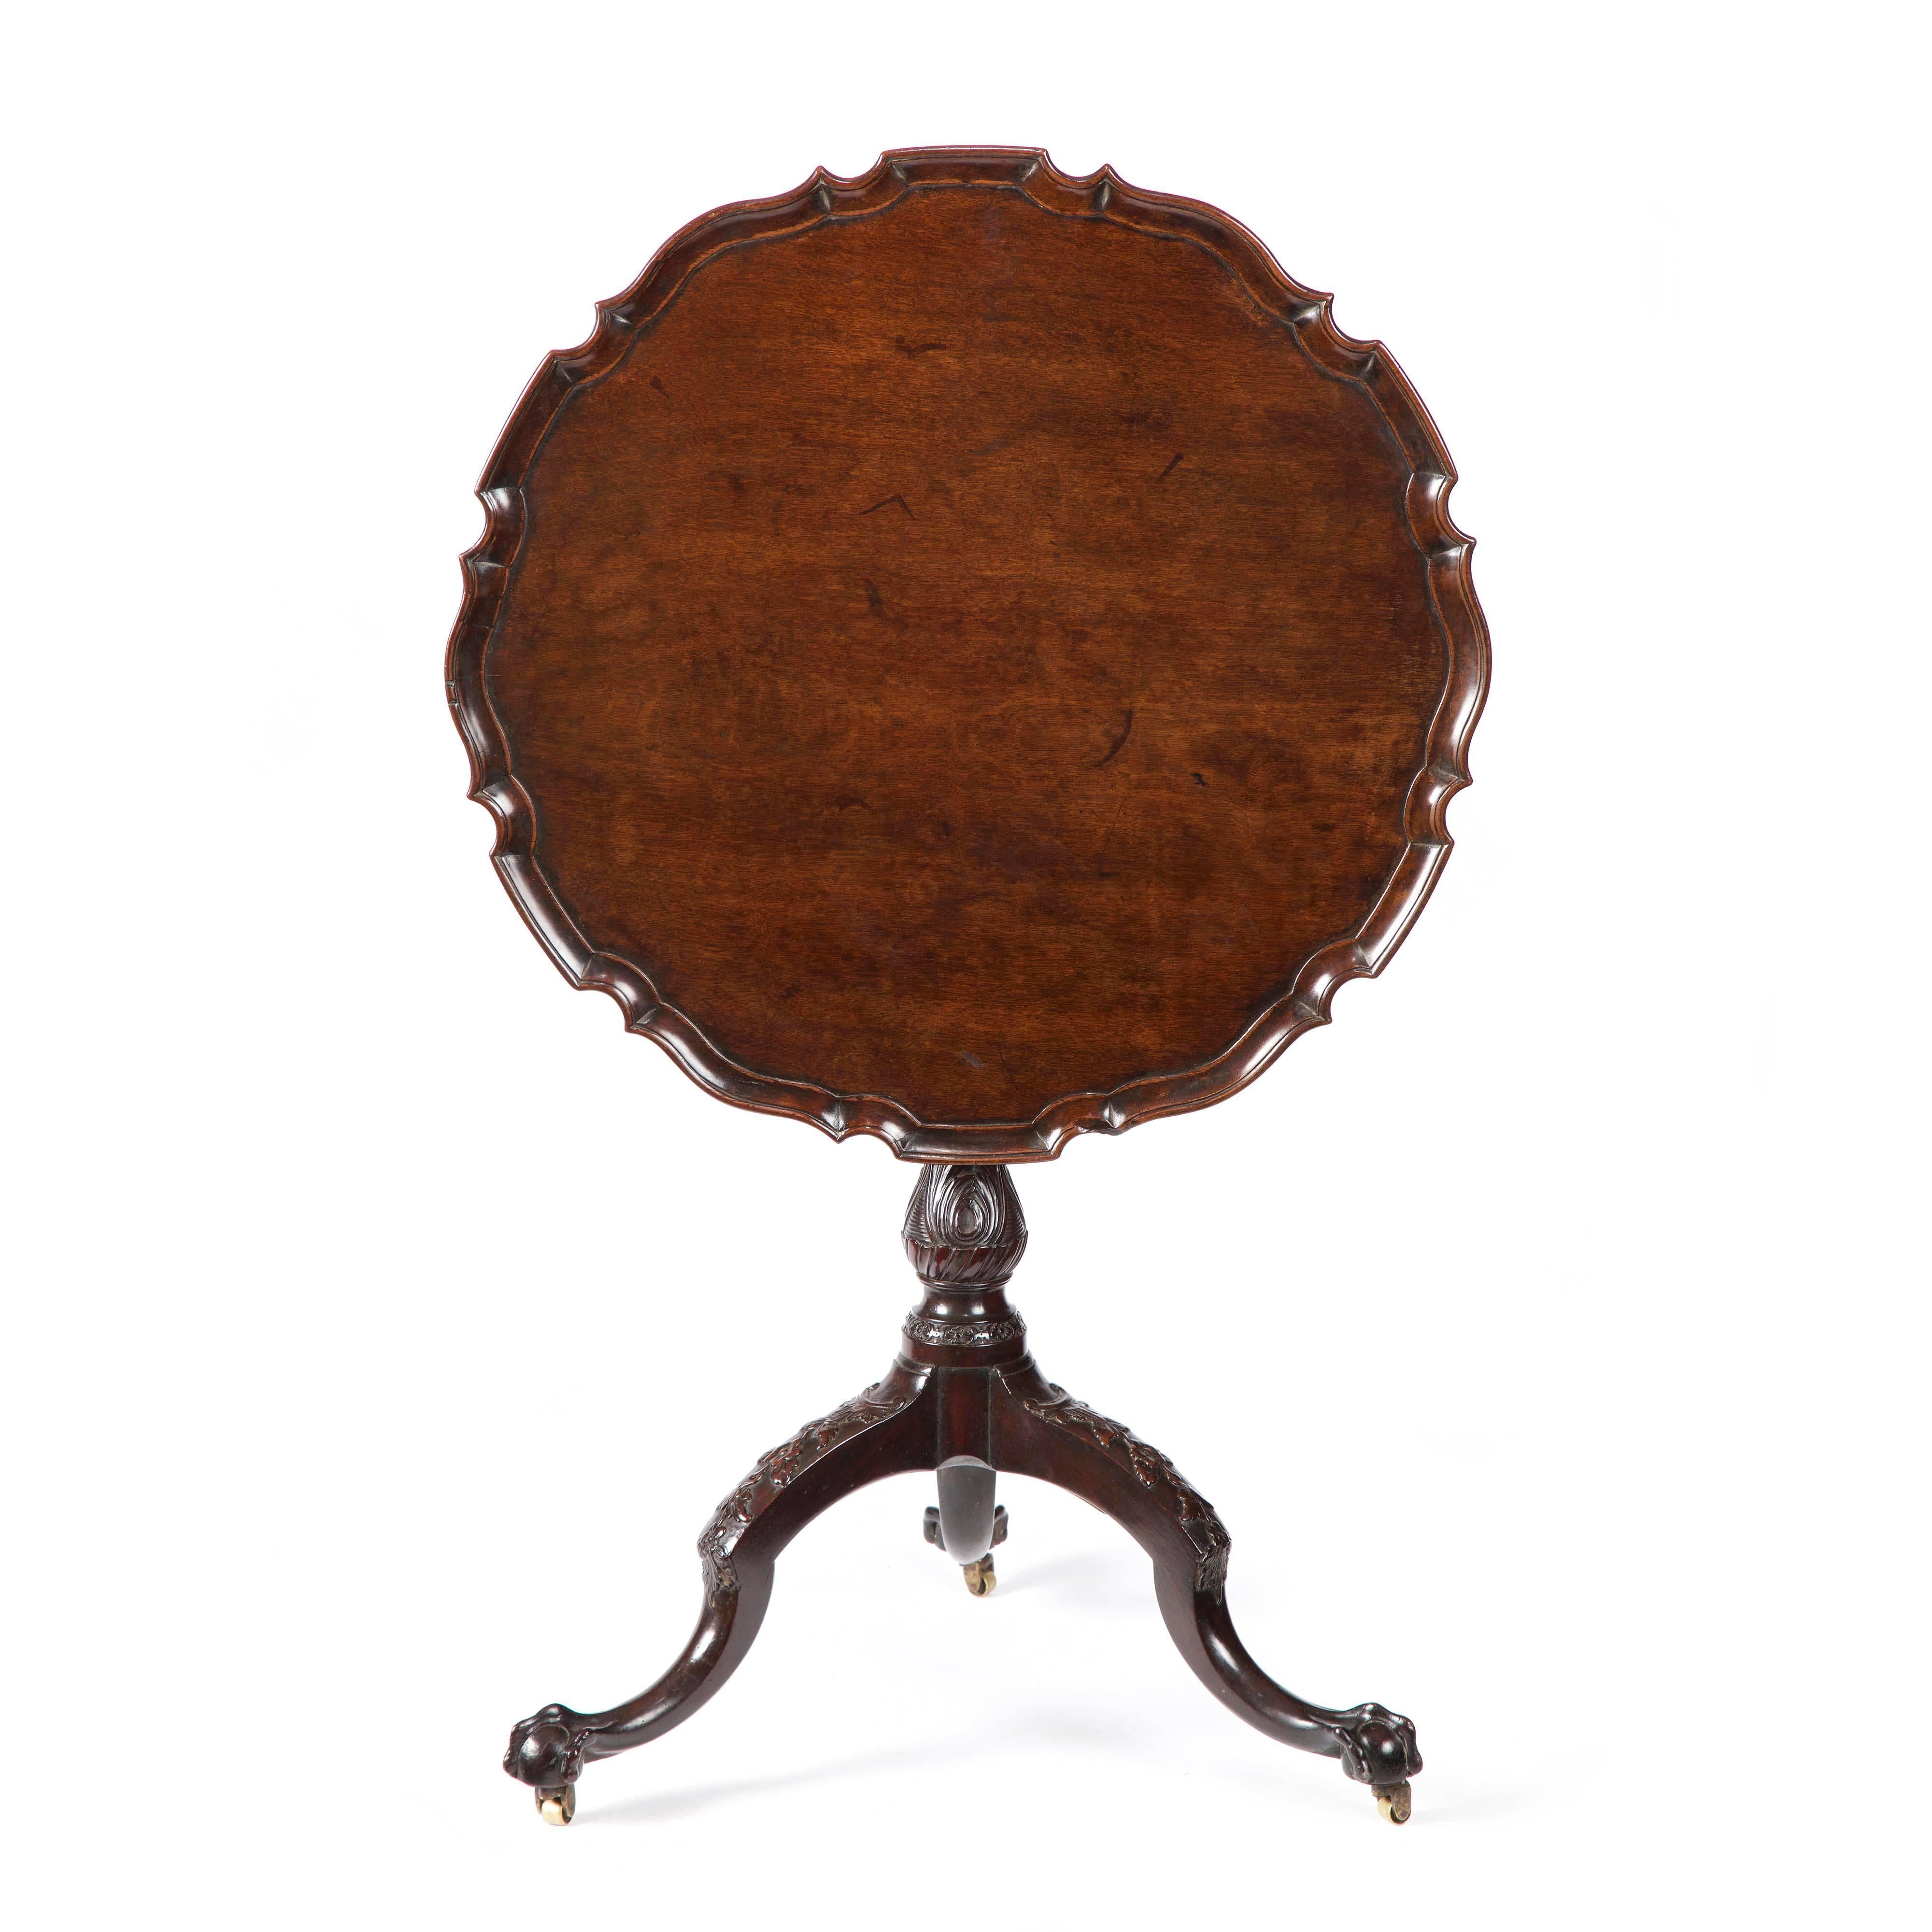 A fine George III carved mahogany piecrust tripod table retaining excellent original color and patina. The well figured top with a crisply carved and moulded “piecrust” edge, with a “snap top” tilting action. The top is supported by a tapering